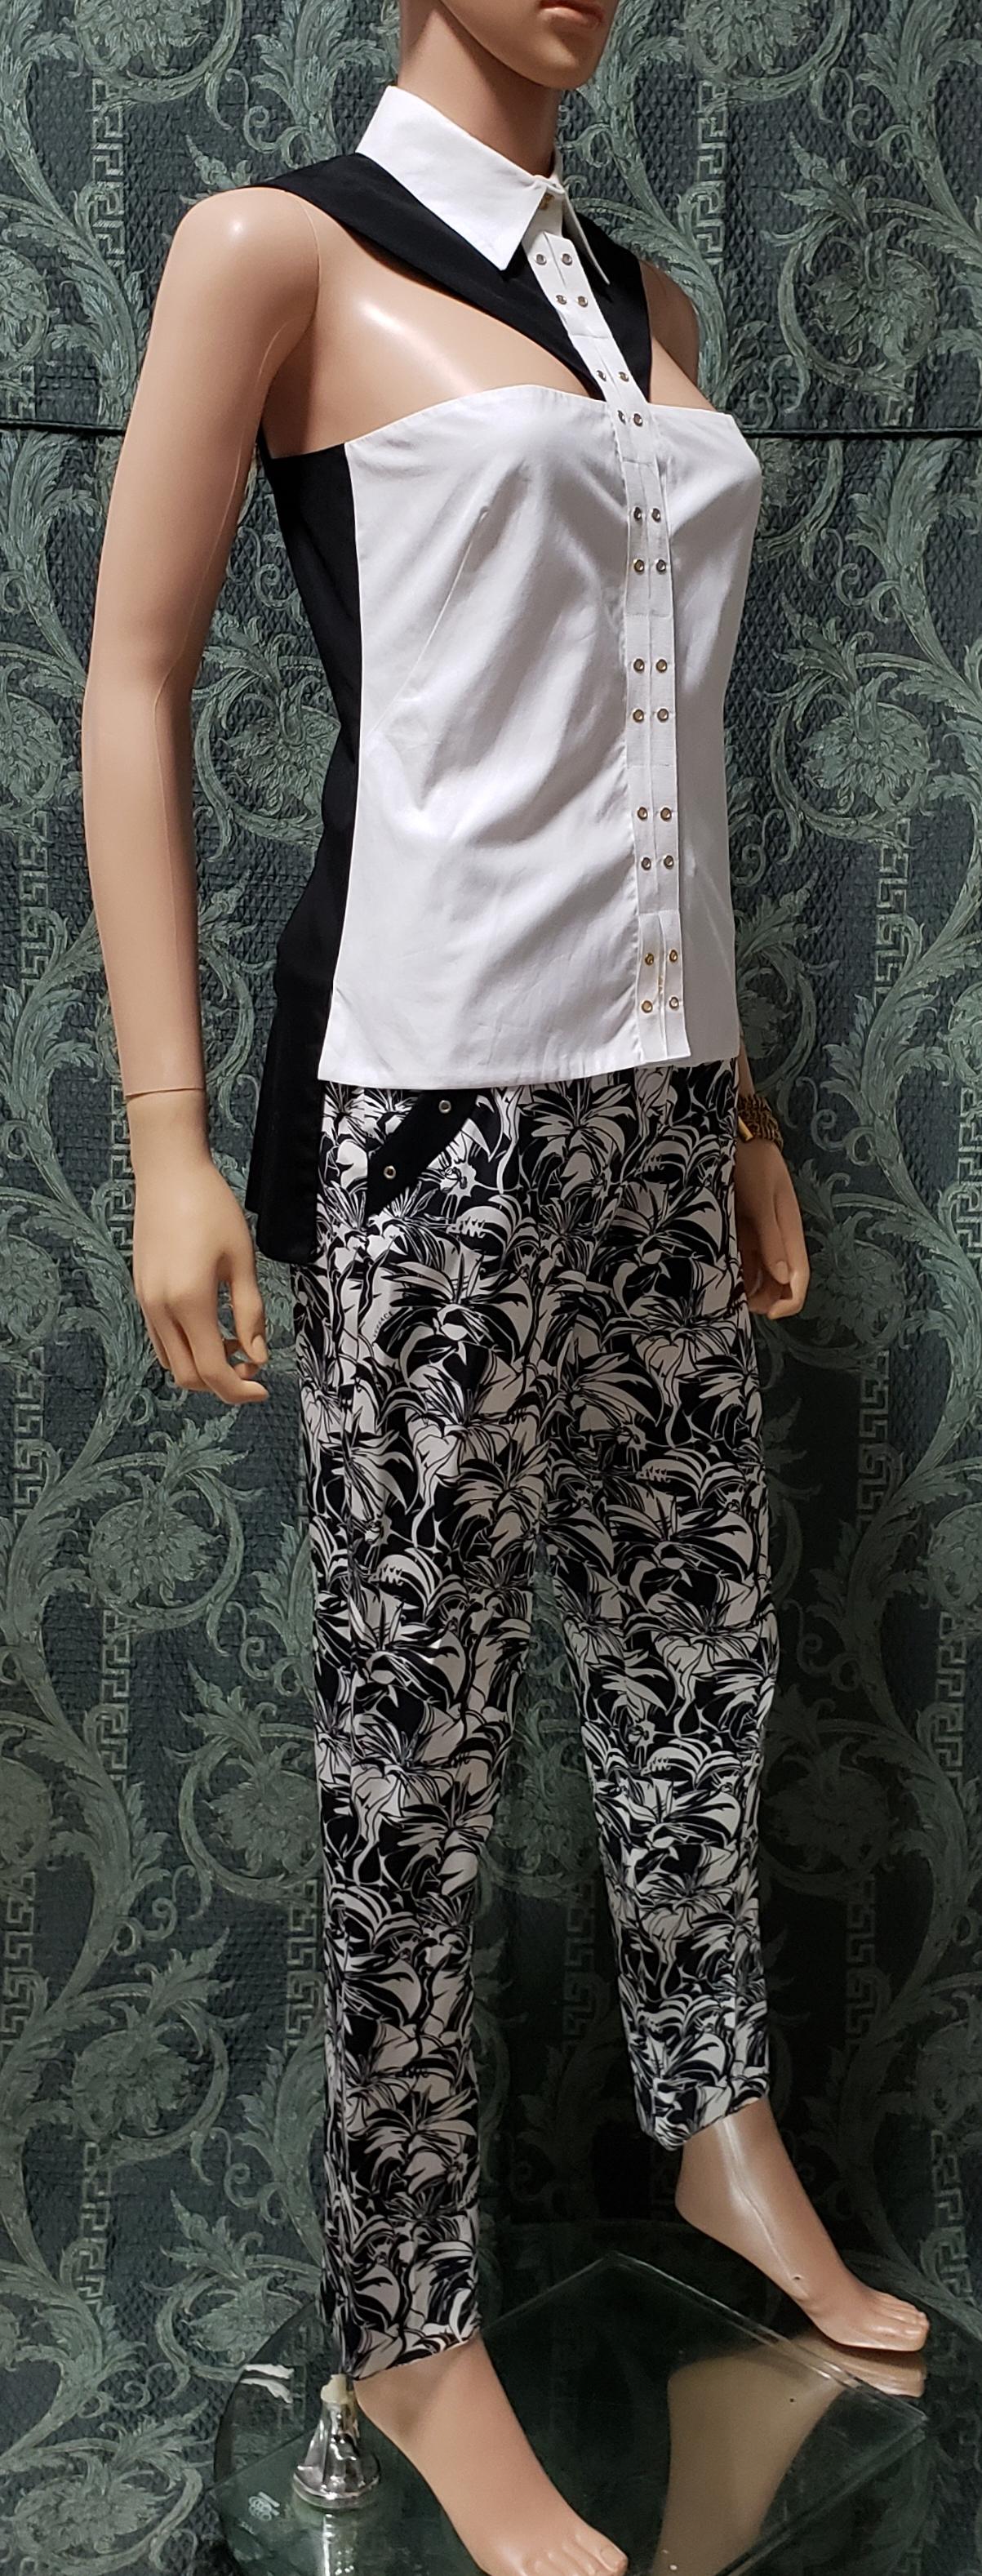 Resort 2012 L#6 NEW VERSACE FLORAL BLACK and WHITE SILK COTTON PANTS SUIT 38 - 2 For Sale 3